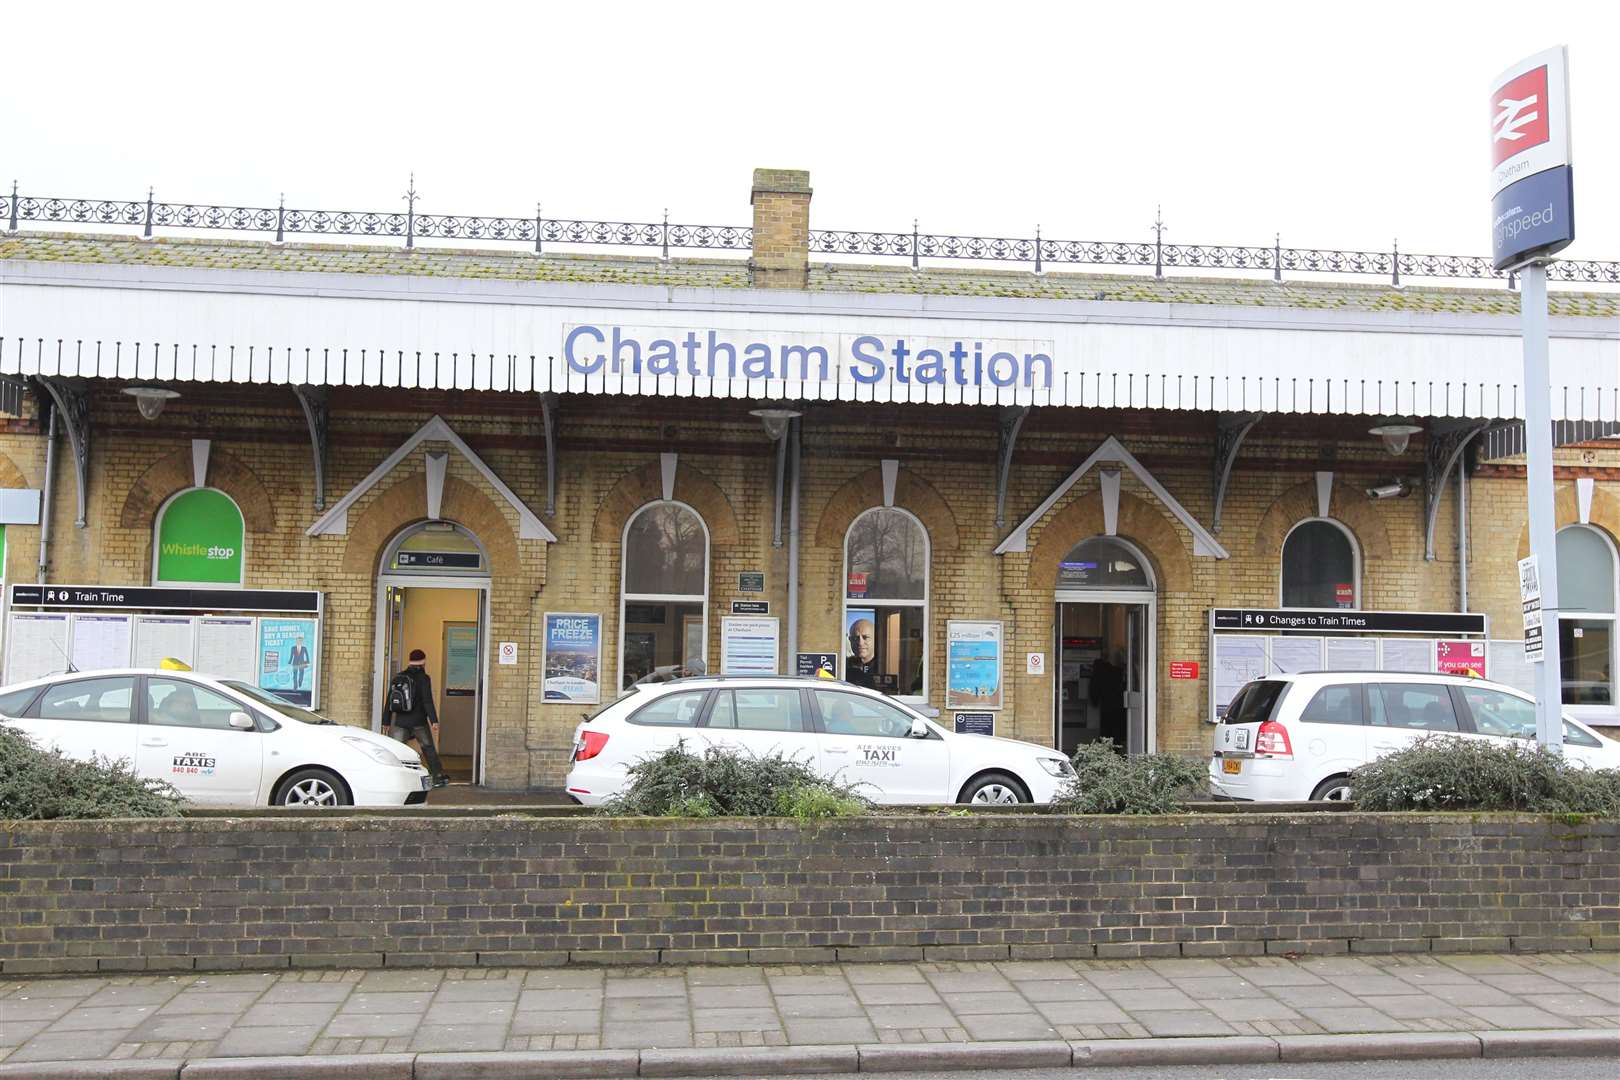 The child was dropped off outside Chatham Railway Station